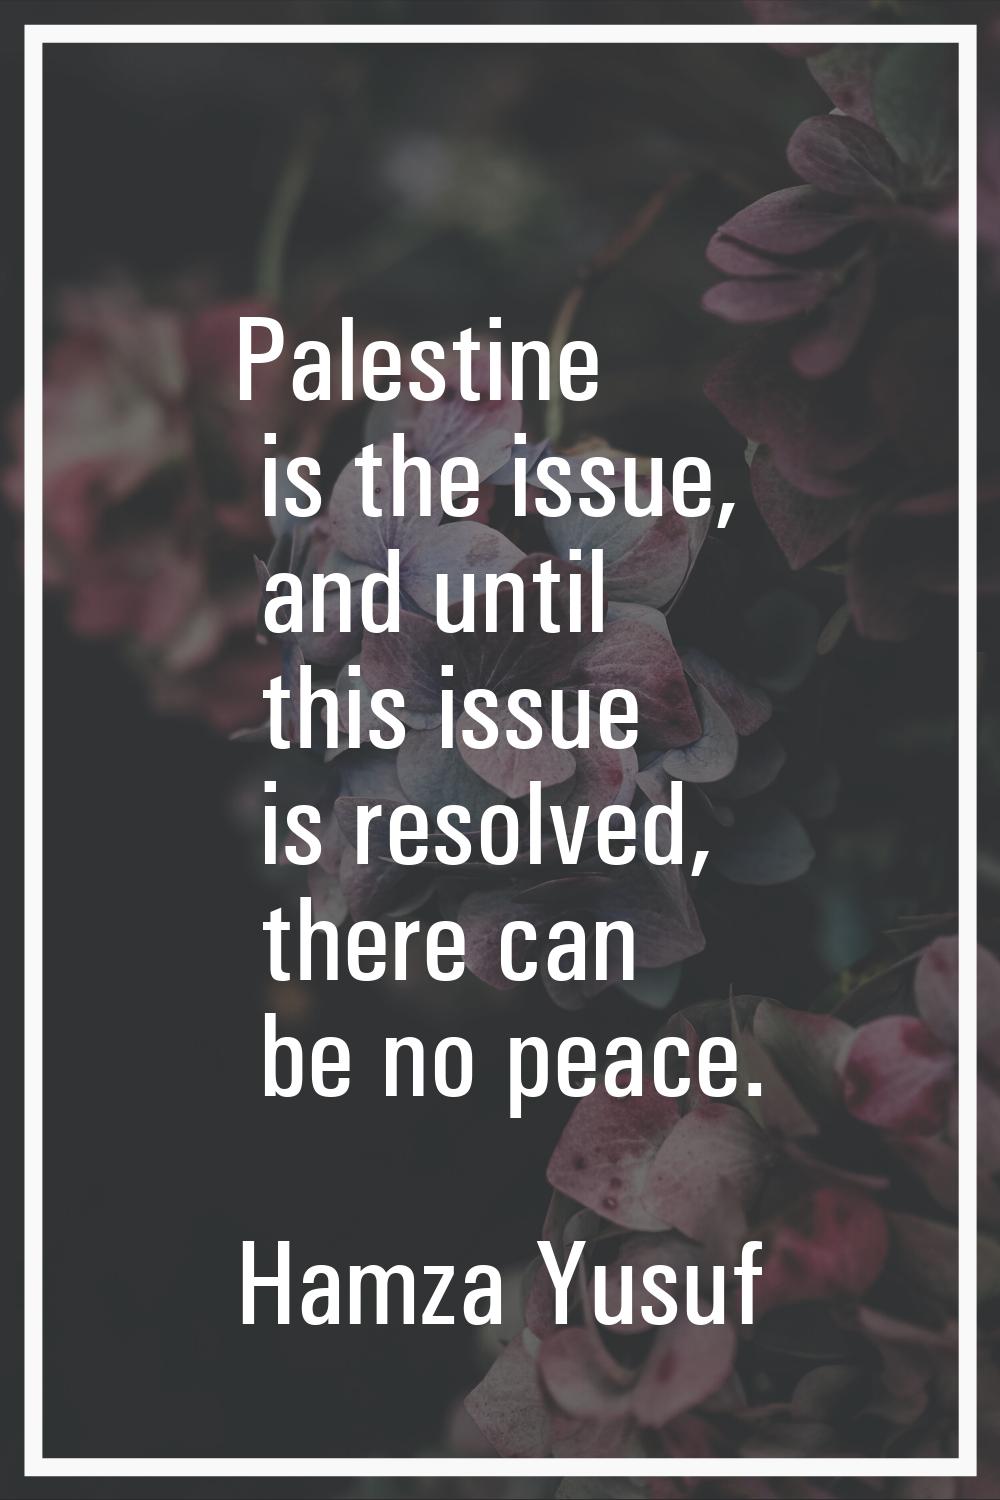 Palestine is the issue, and until this issue is resolved, there can be no peace.